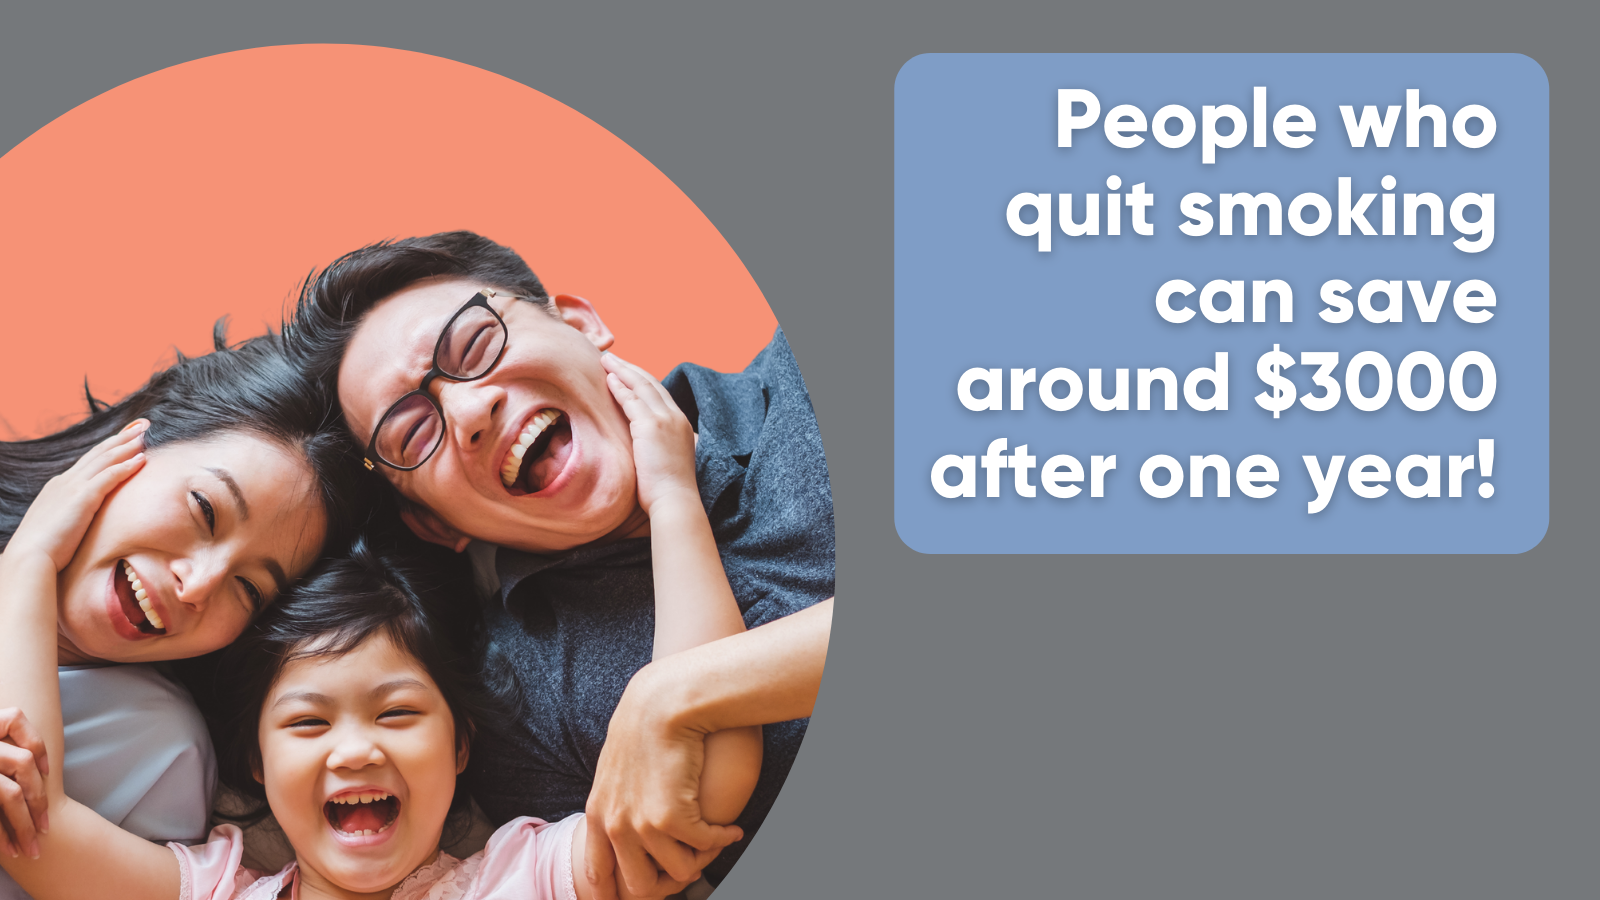 Image of Asian family: People who quit smoking can save around $3000 after one year!